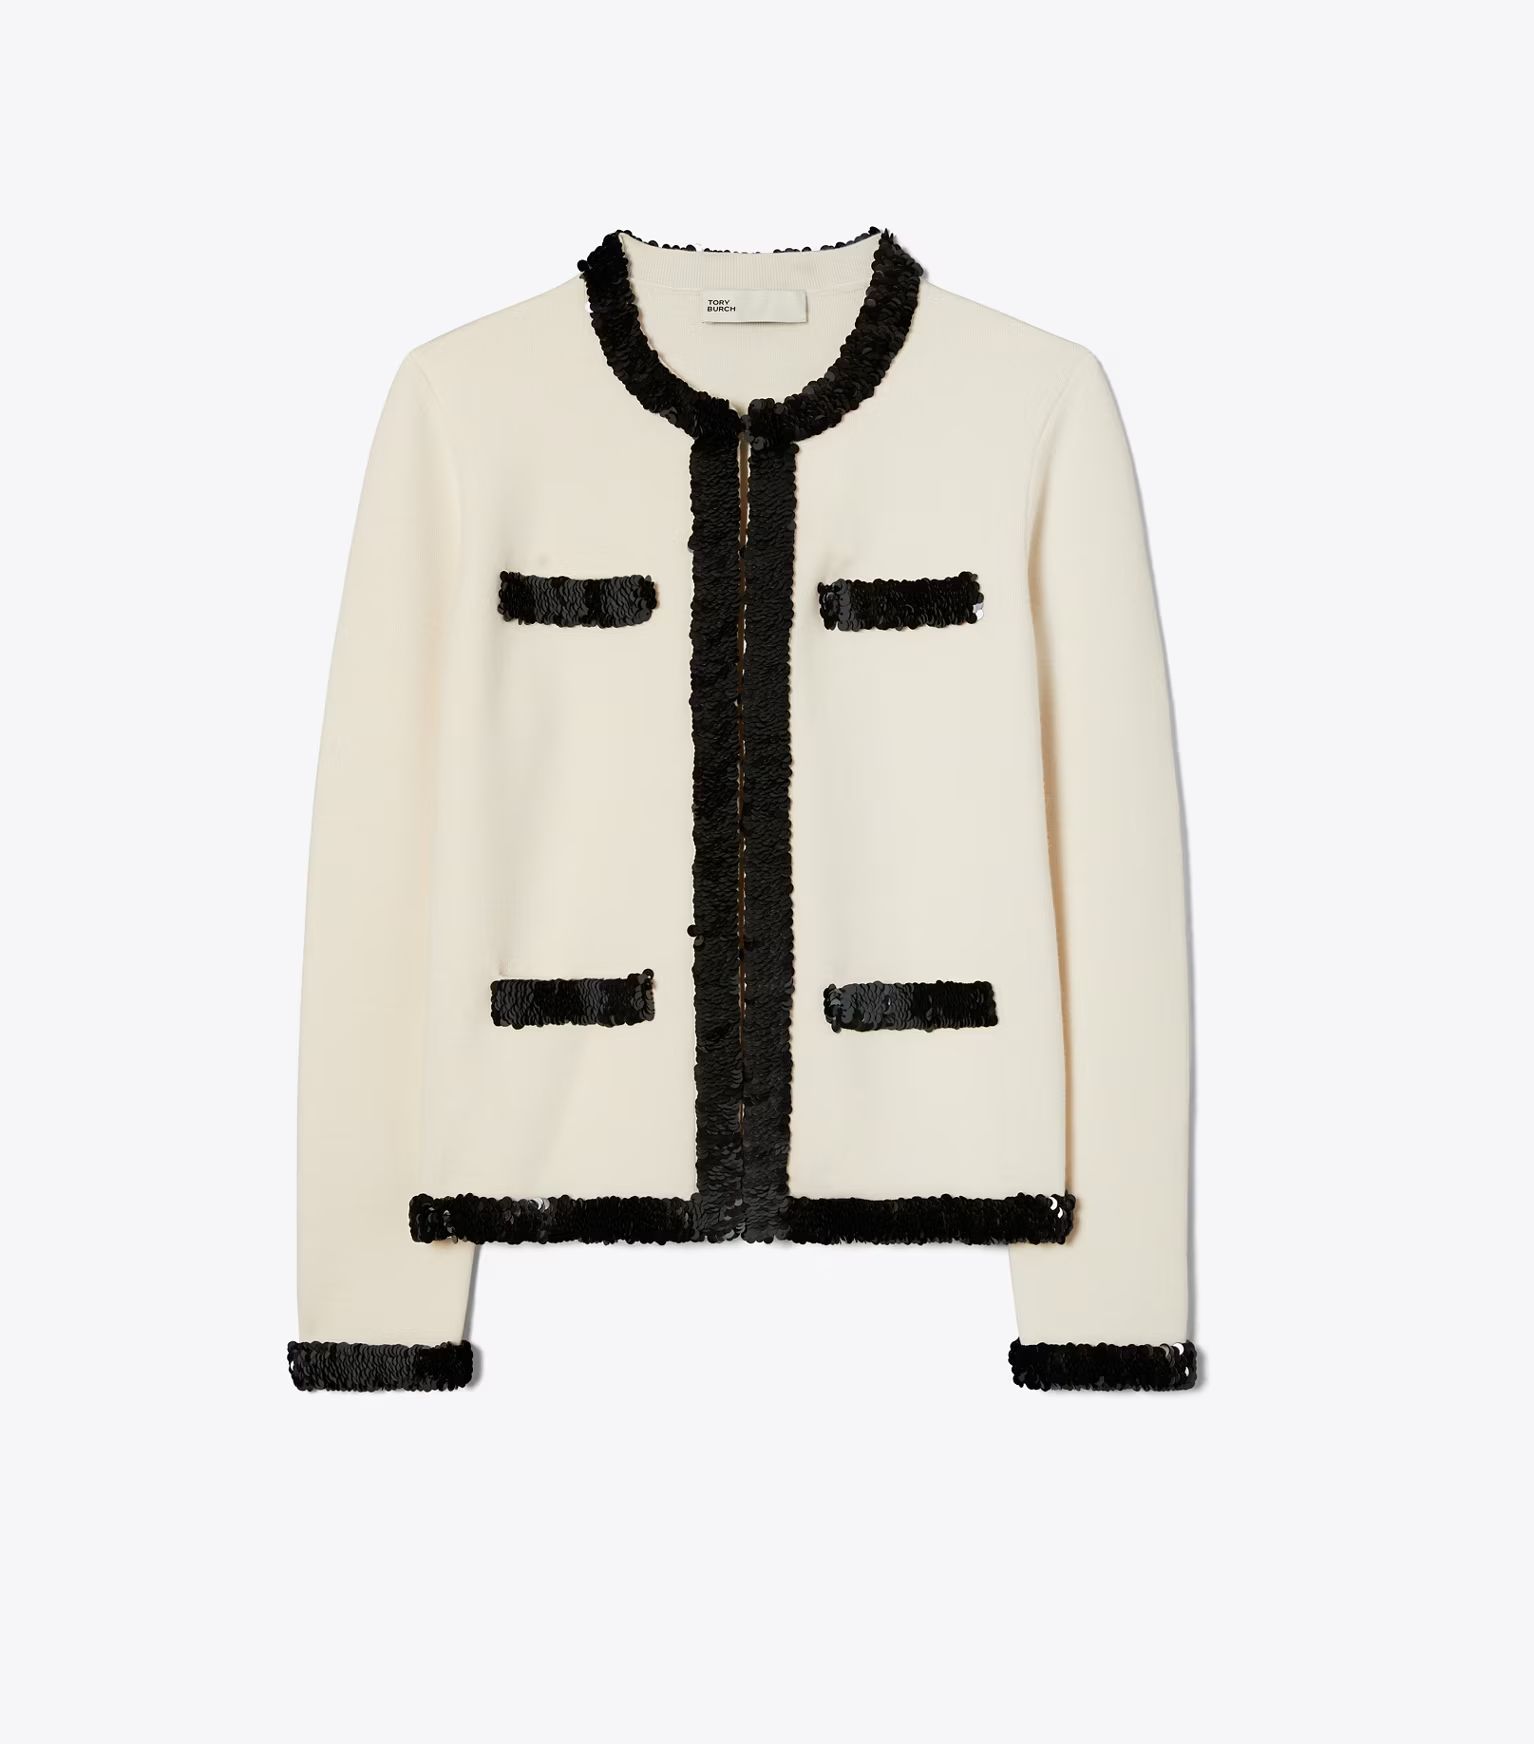 KENDRA WOOL AND SEQUIN JACKET | Tory Burch (US)